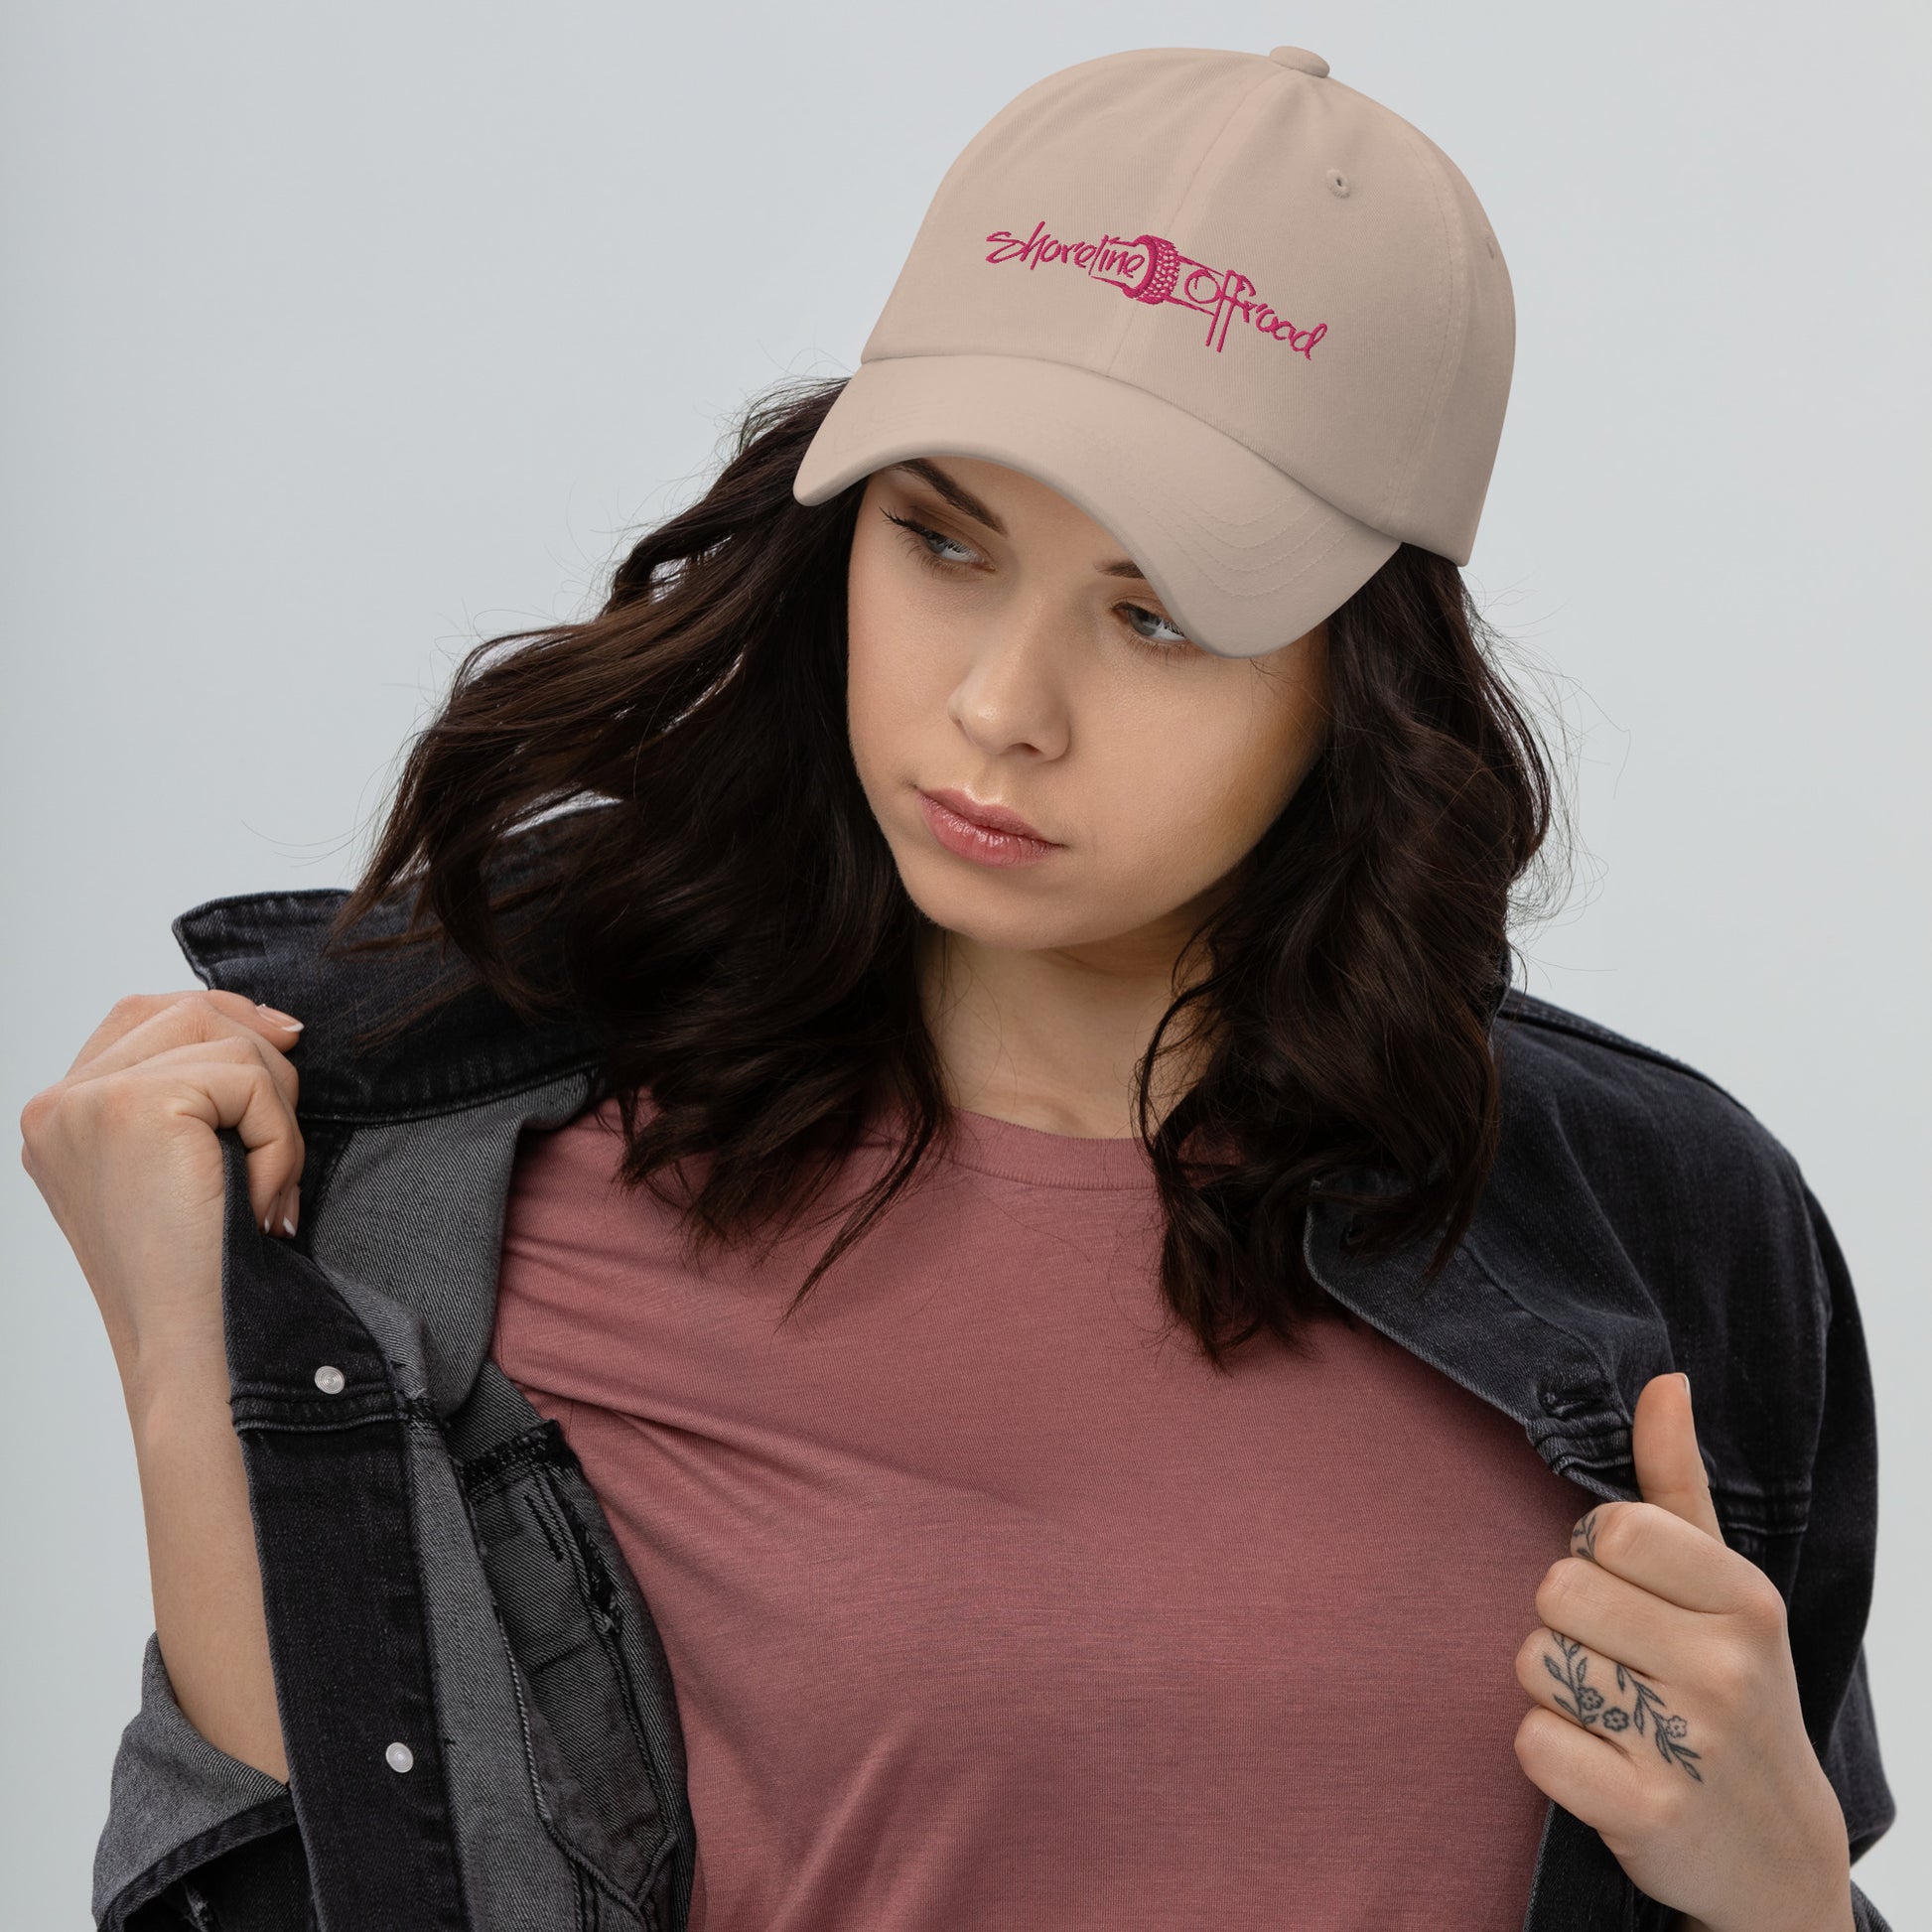 a woman wearing a pink shirt and a hat